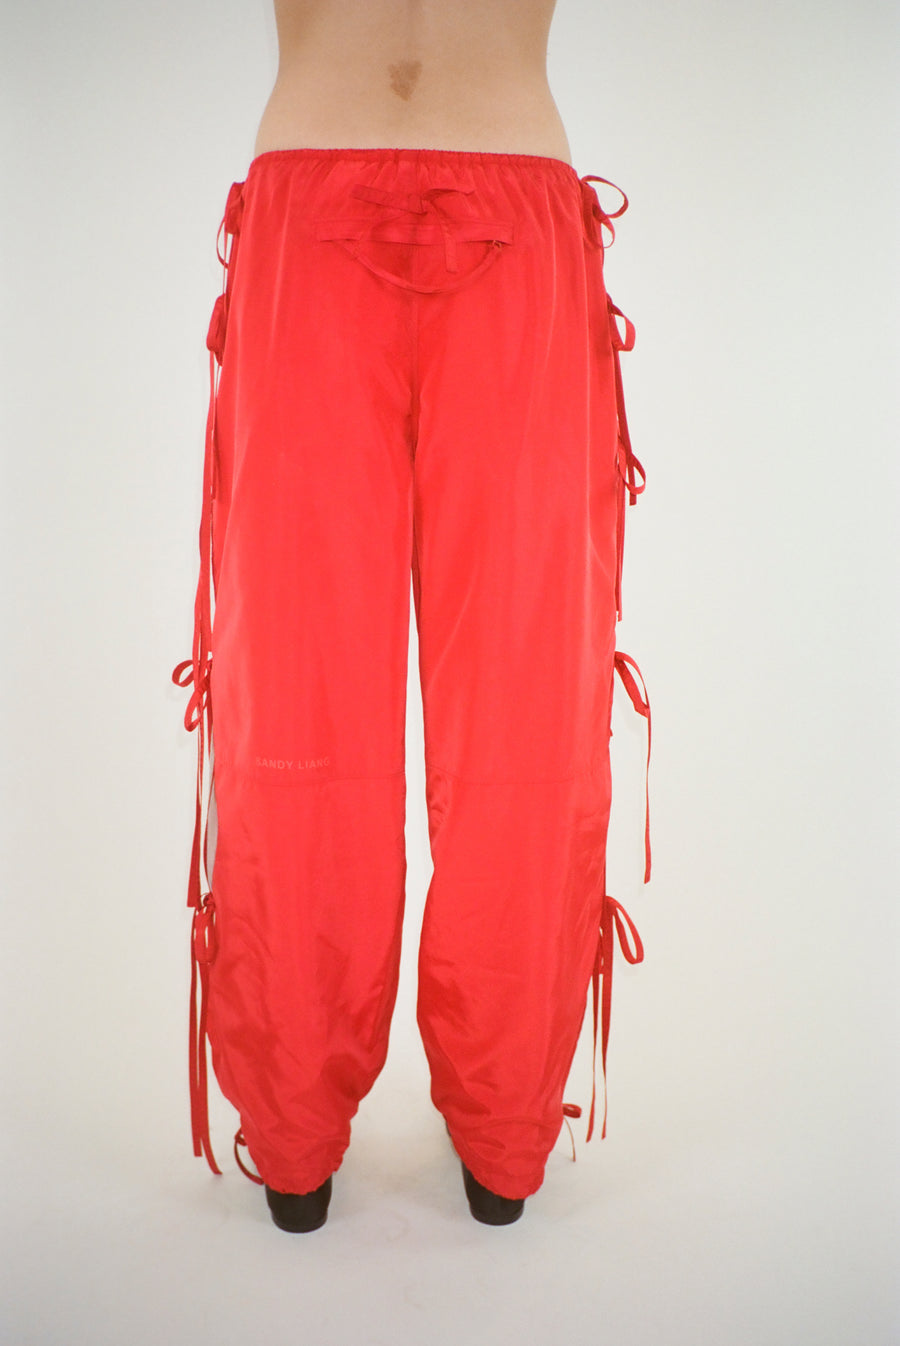 Trackpant in red with slits and ties at sides on model